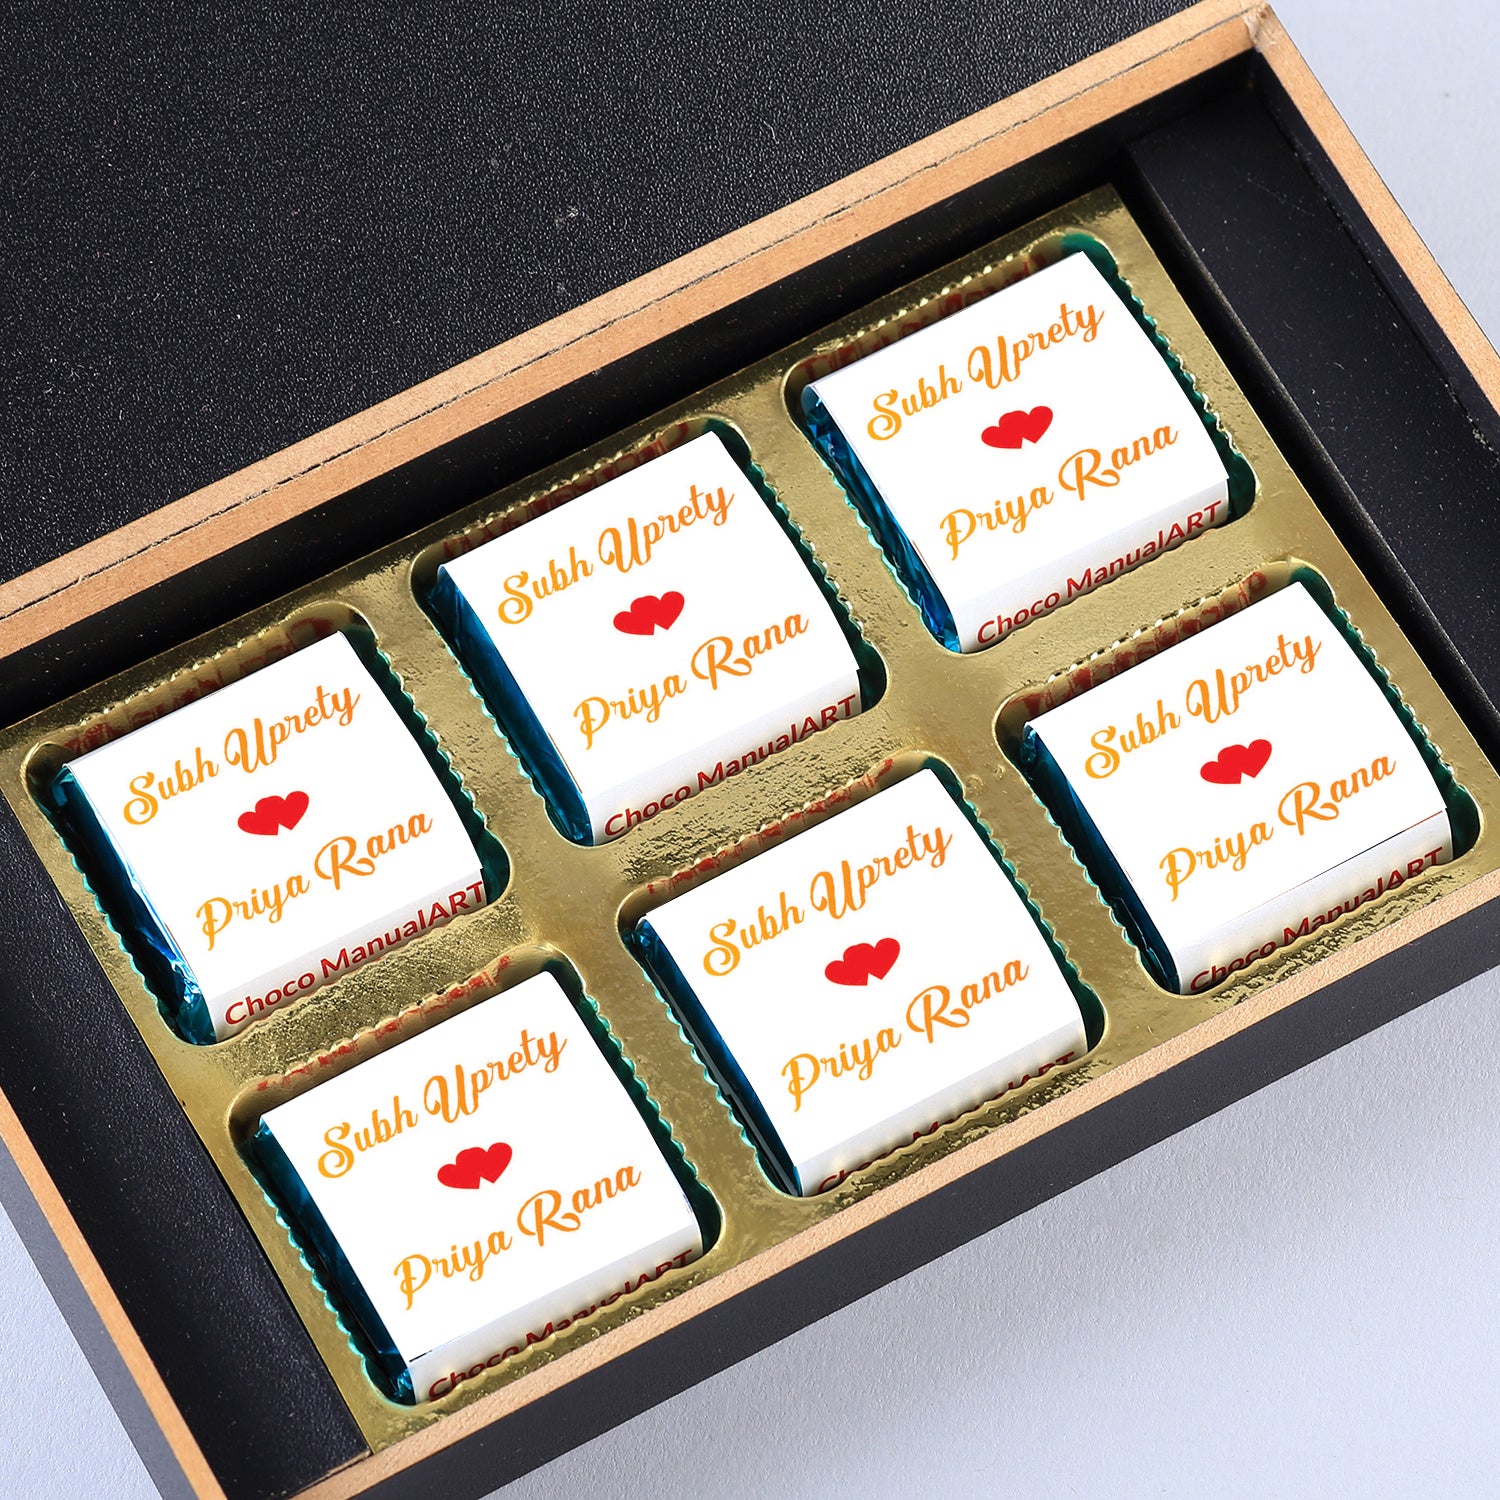 Everyone loves chocolates! Chocolates are perhaps the most widely accepted gift. Surprise them with the name printed on chocolates 